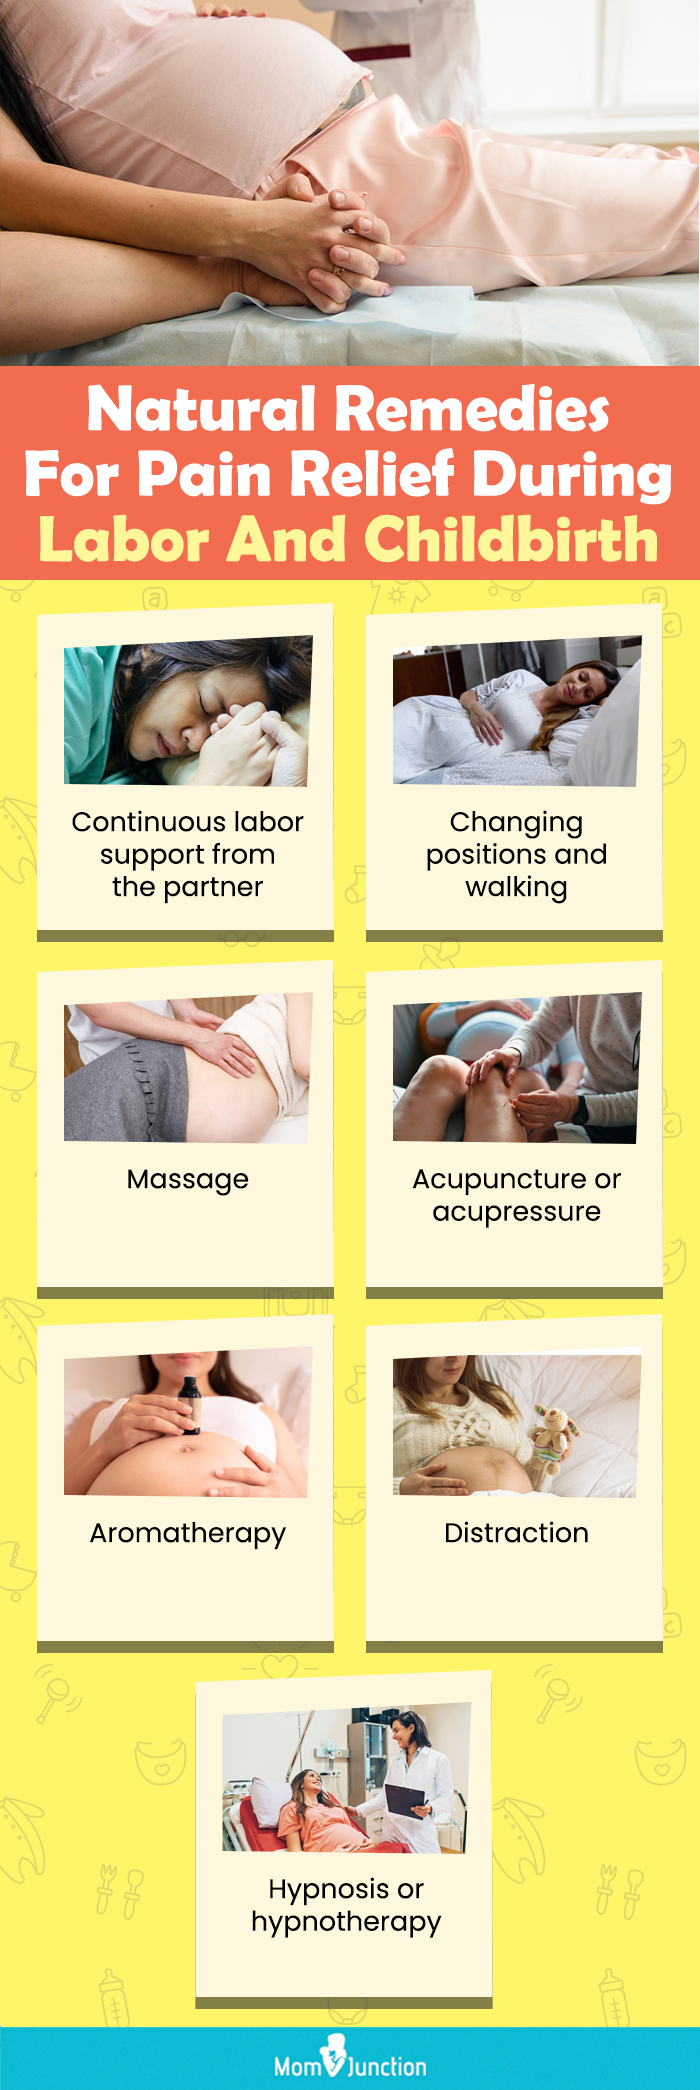 natural remedies for pain relief during labor and childbirth (infographic)